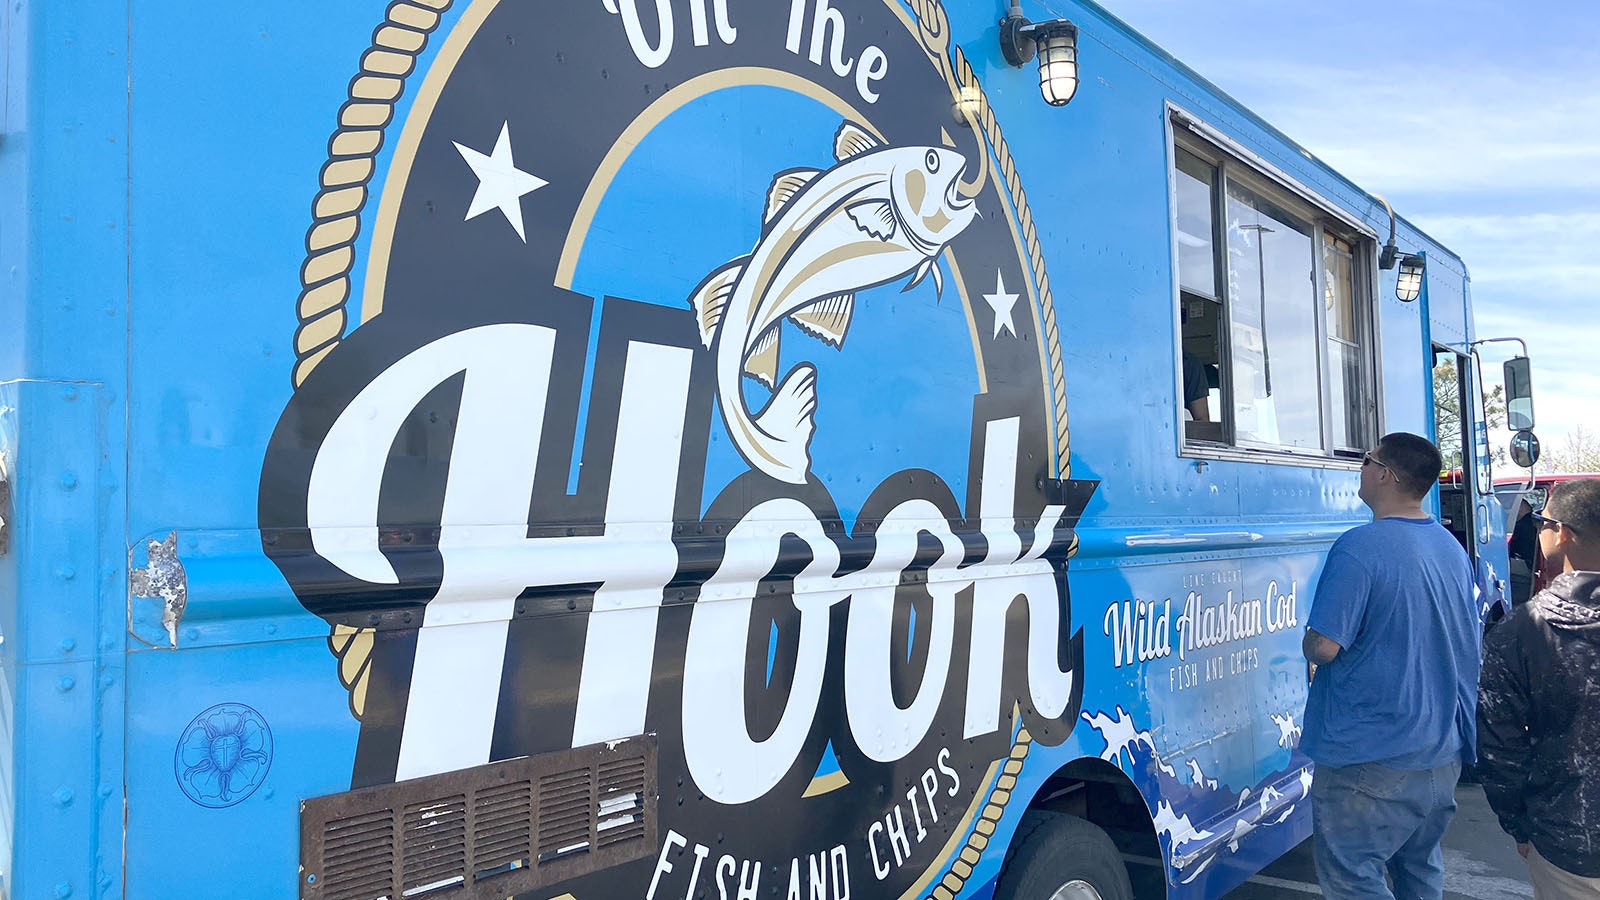 The On the Hook Fish And Chips truck was doing a brisk business parked on the east side of Casper on Monday.